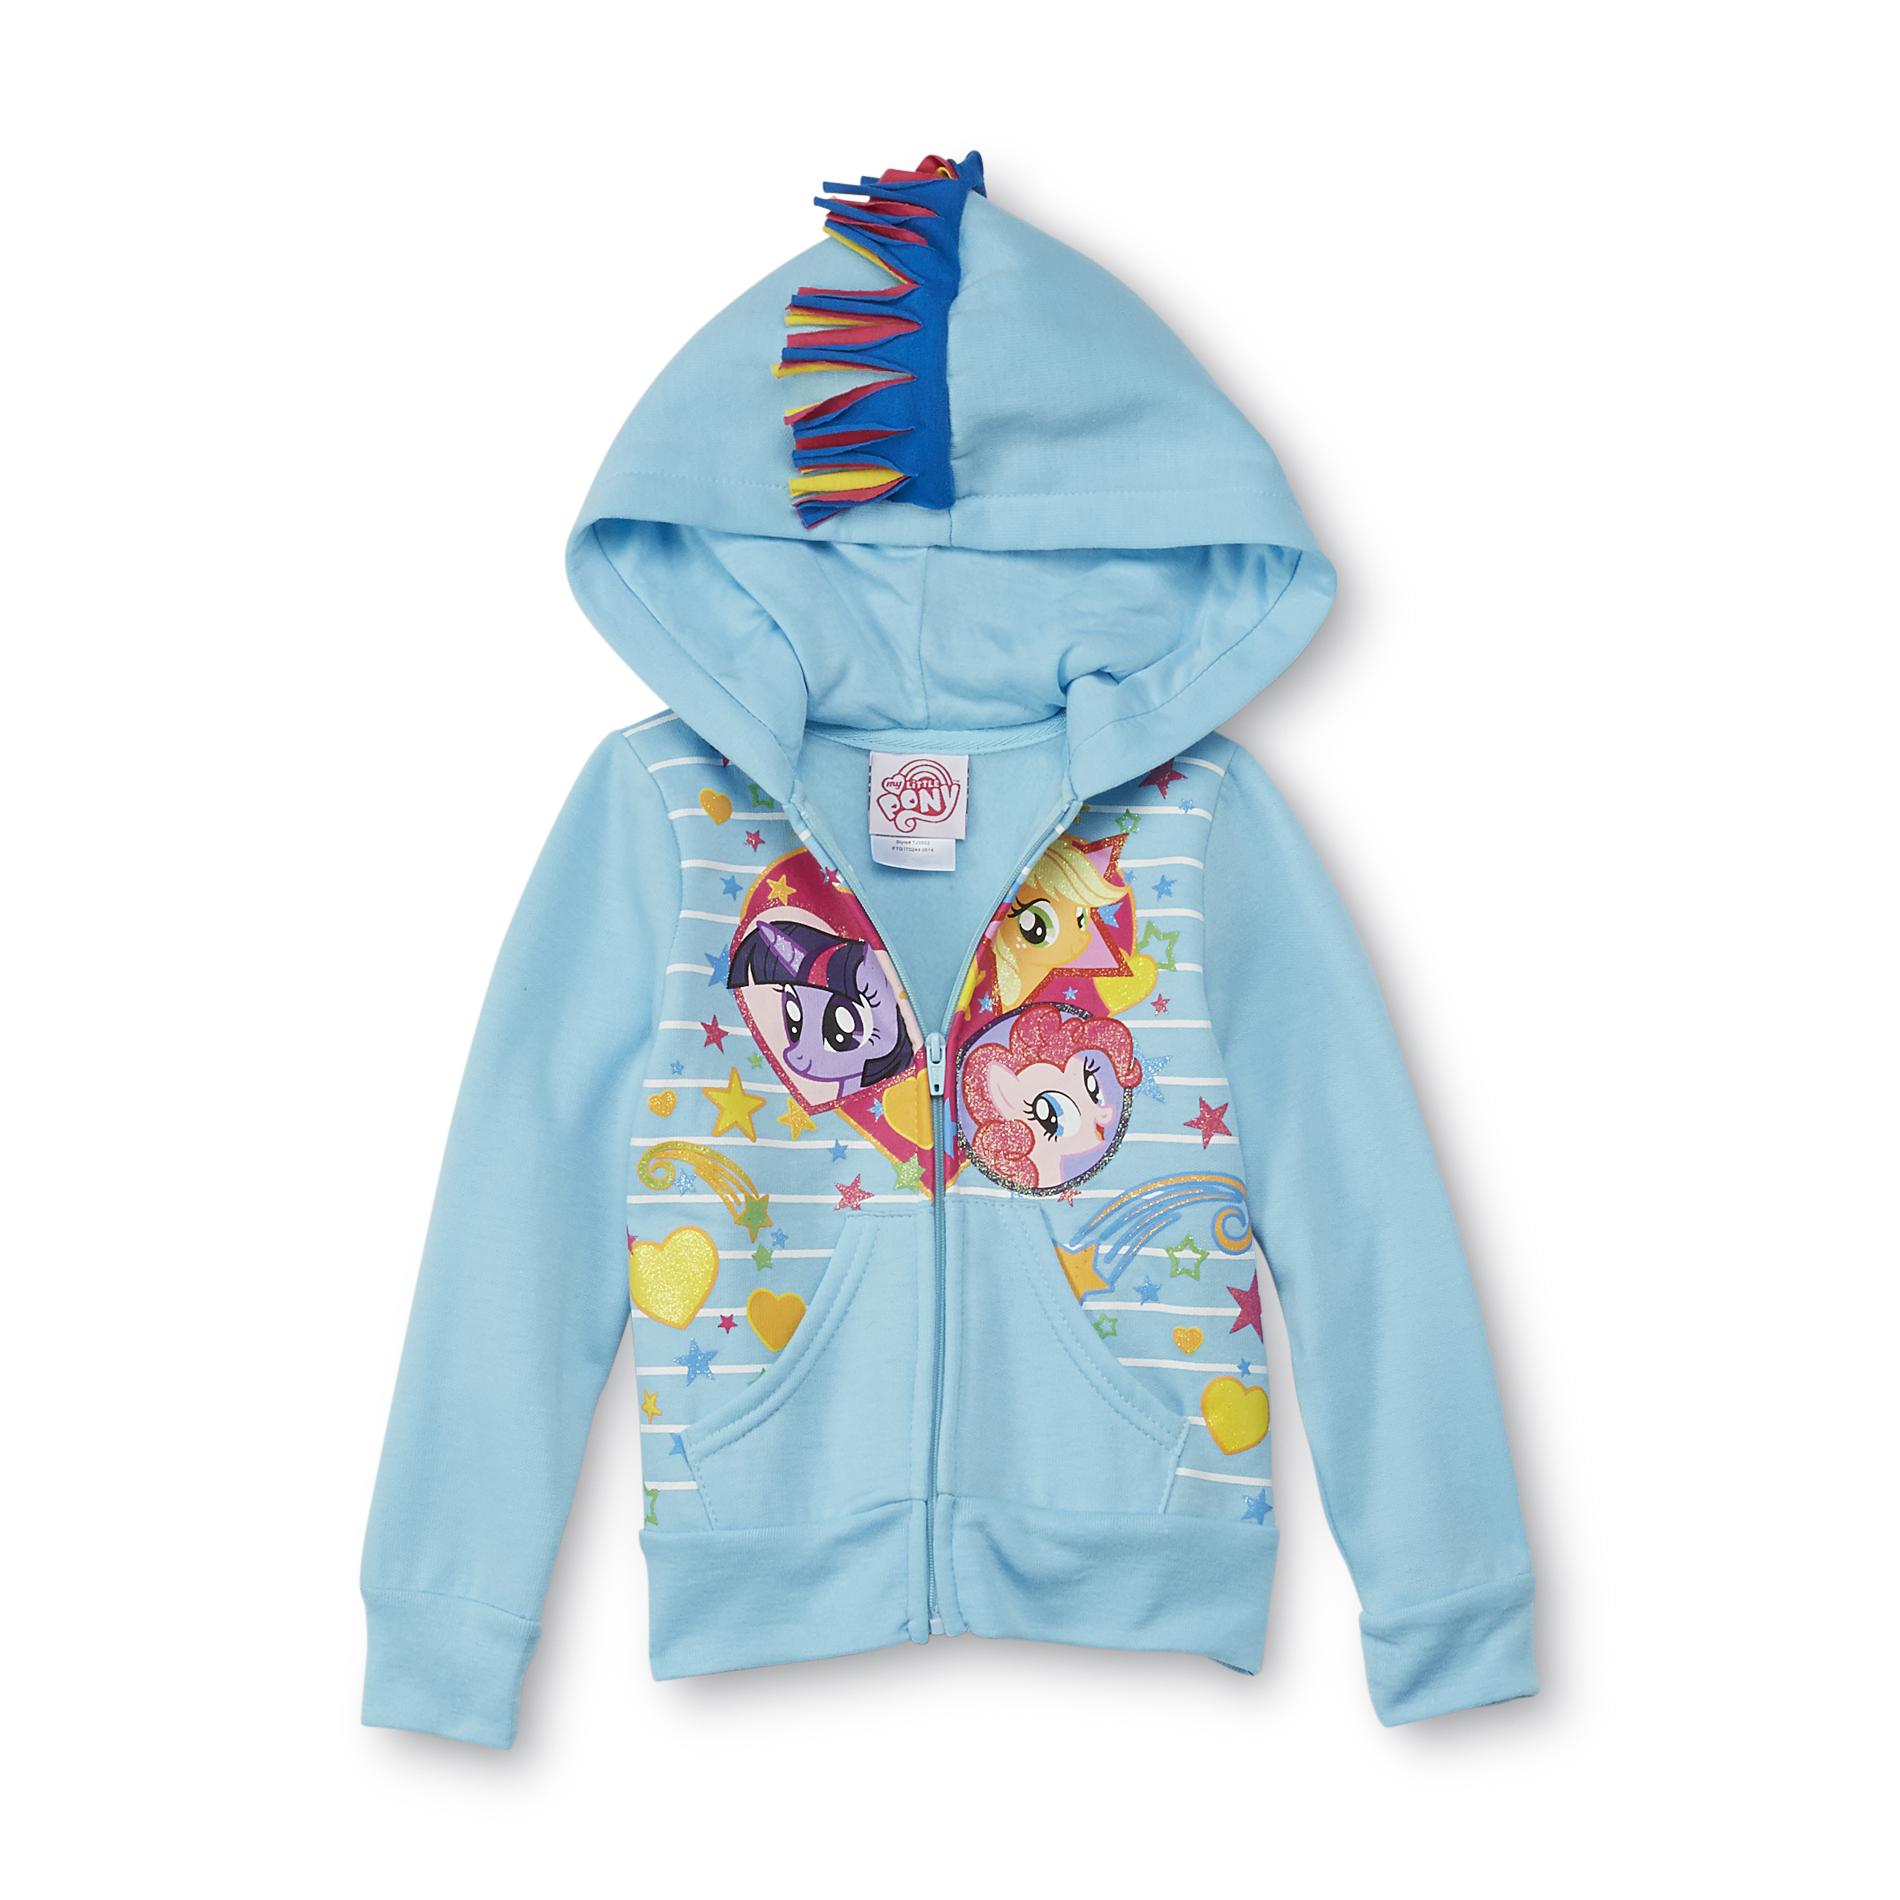 My Little Pony Infant & Toddler Girl's Hoodie Jacket